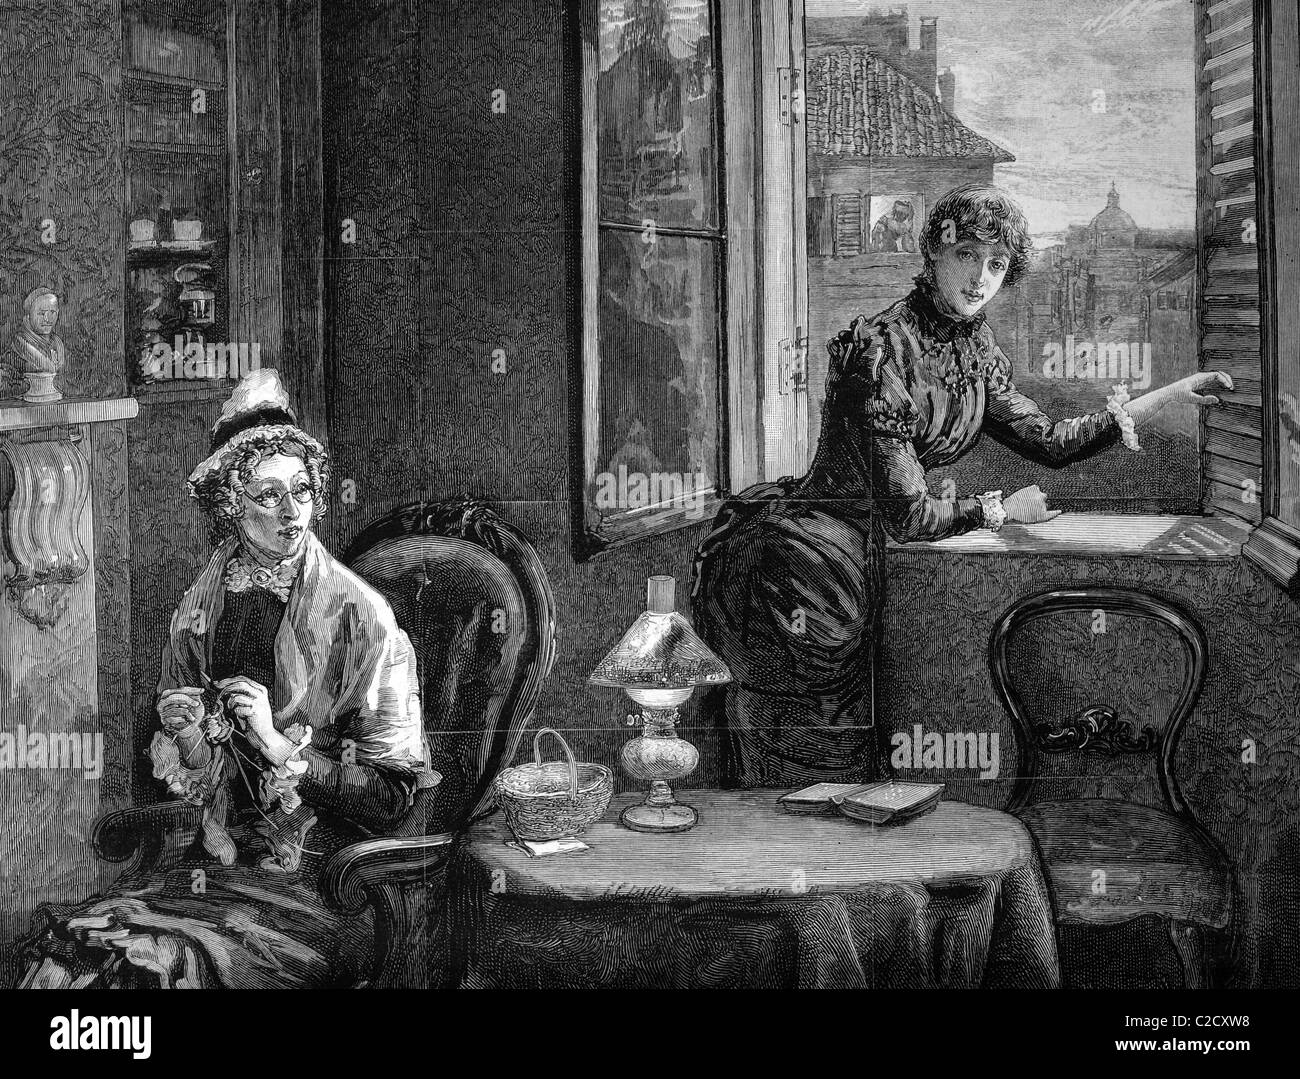 Women in the sewing room, historical illustration, 1884 Stock Photo